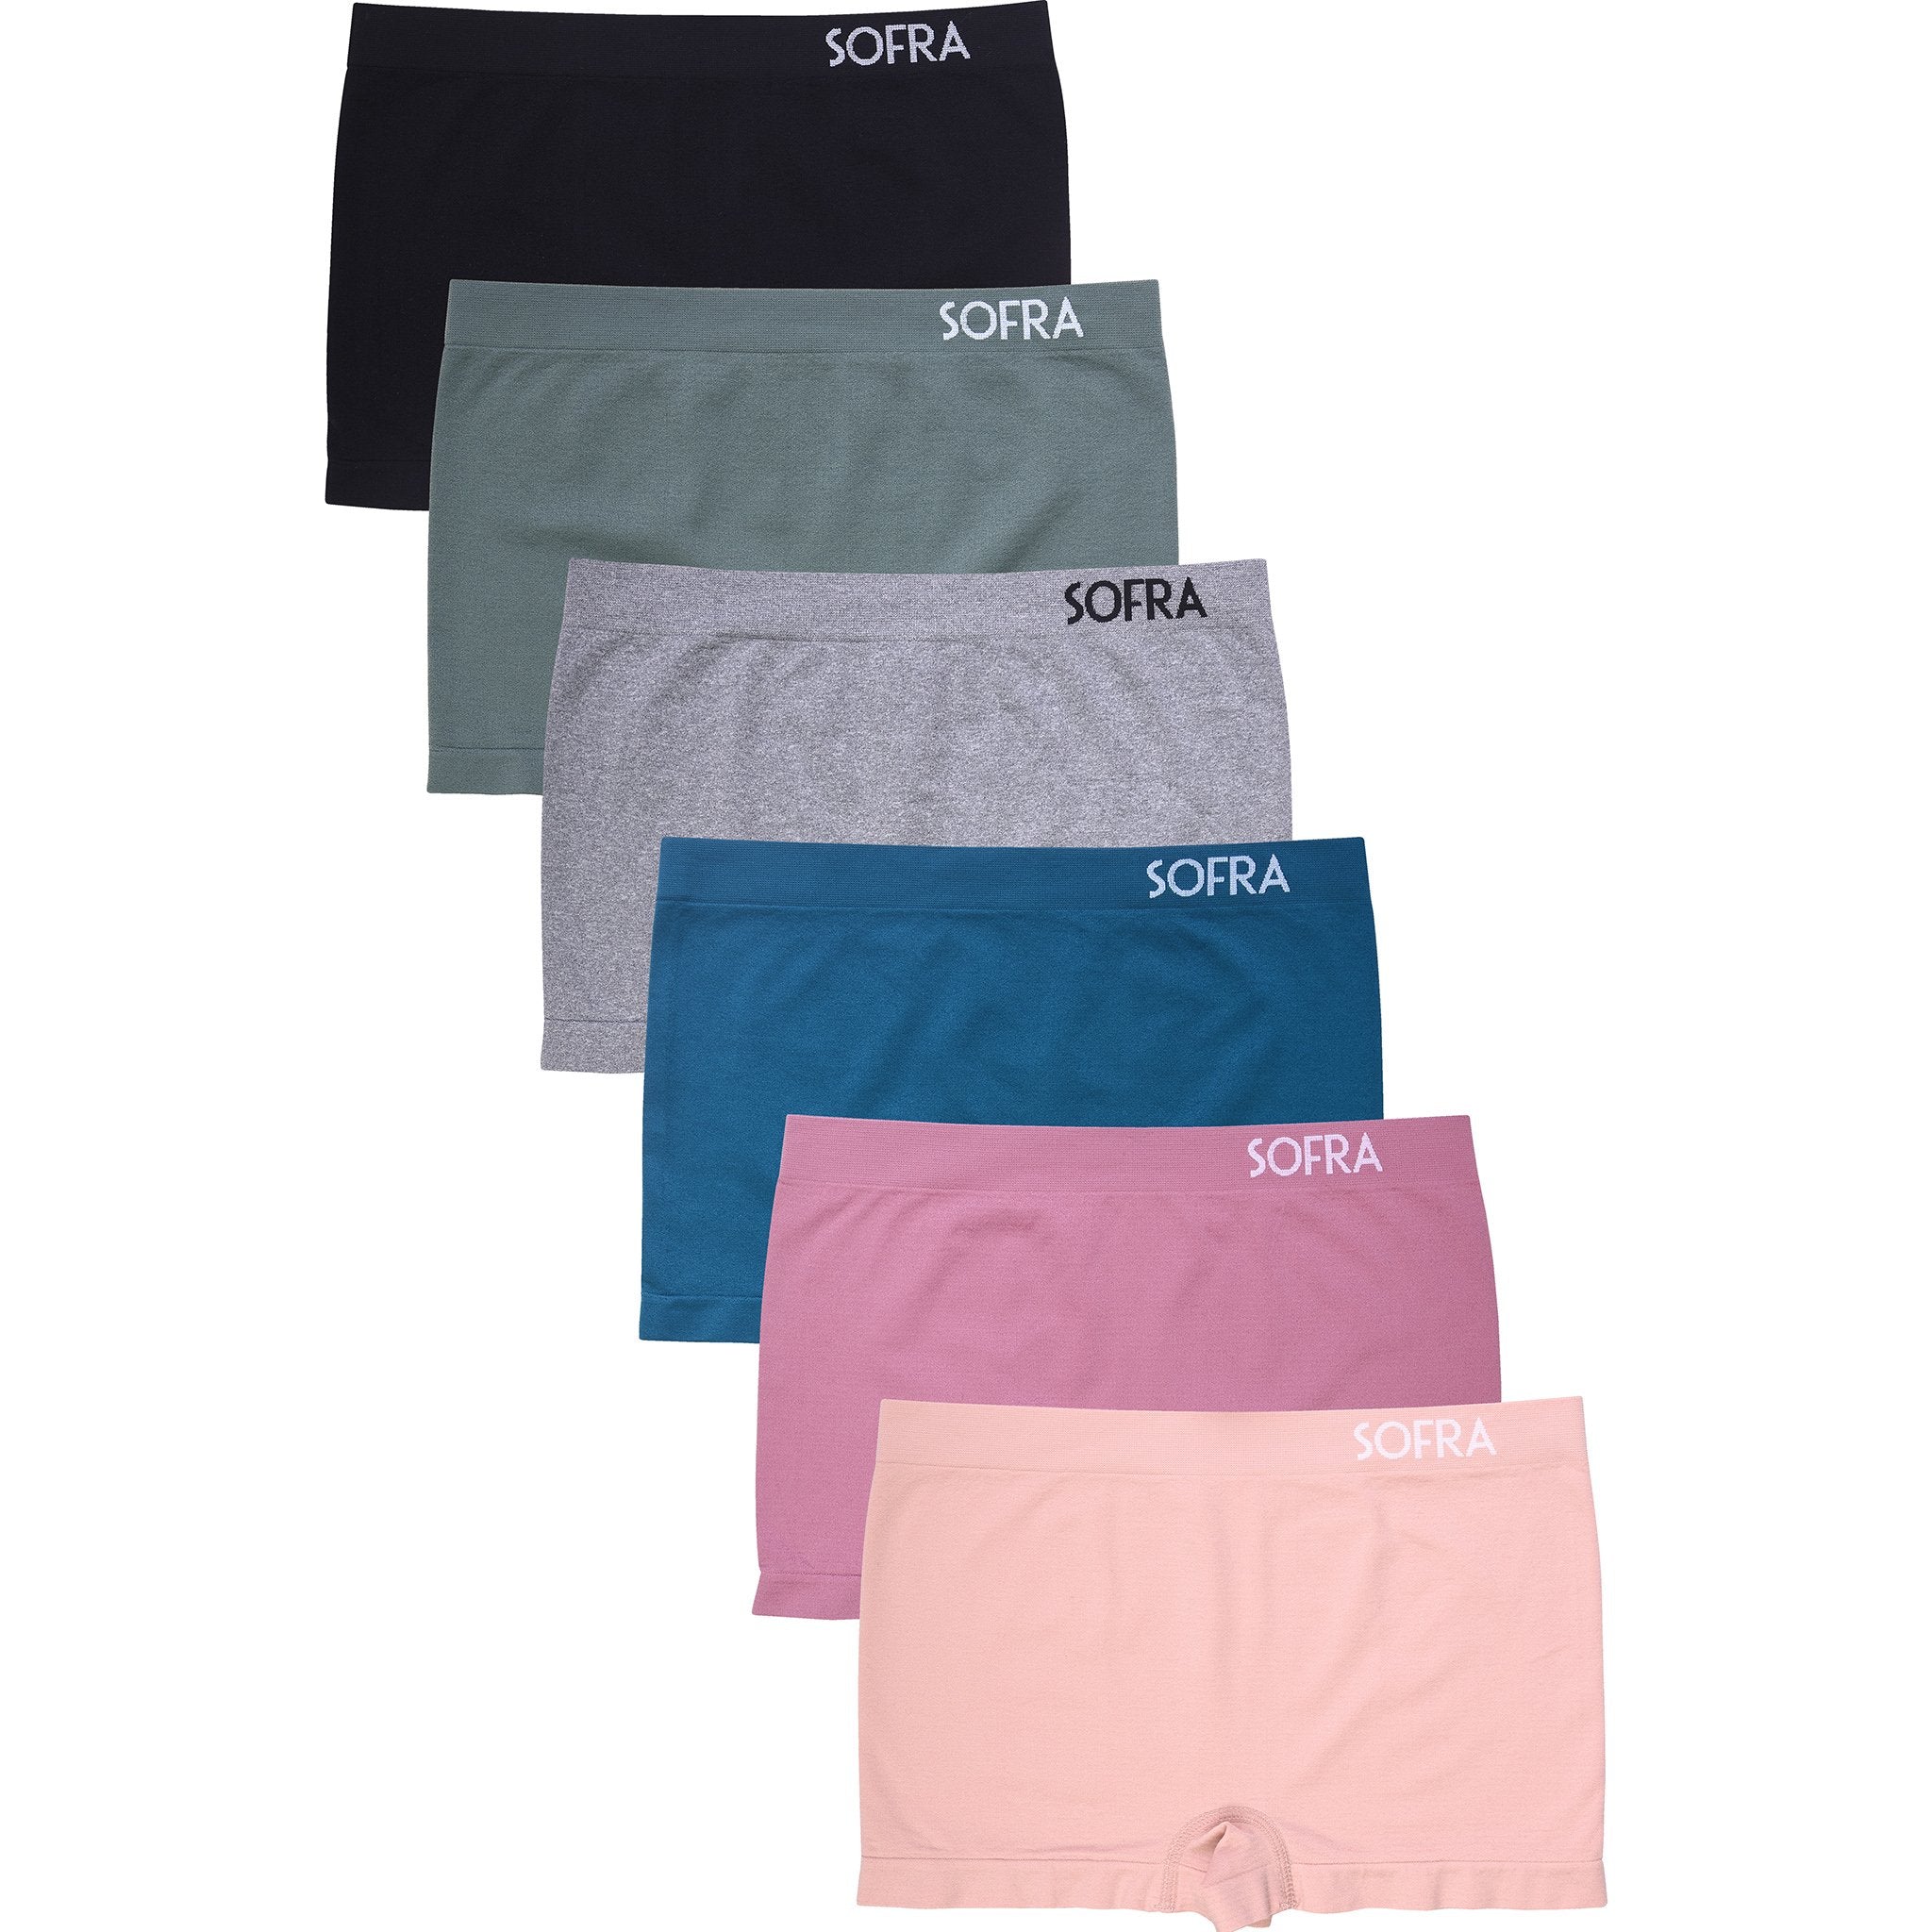 6 Packs of Women Seamless Boyshorts Classy Sexy Stretch Panty (Multi Colors  and Patterns) - Style#1 / Free Size Fits Small to Large